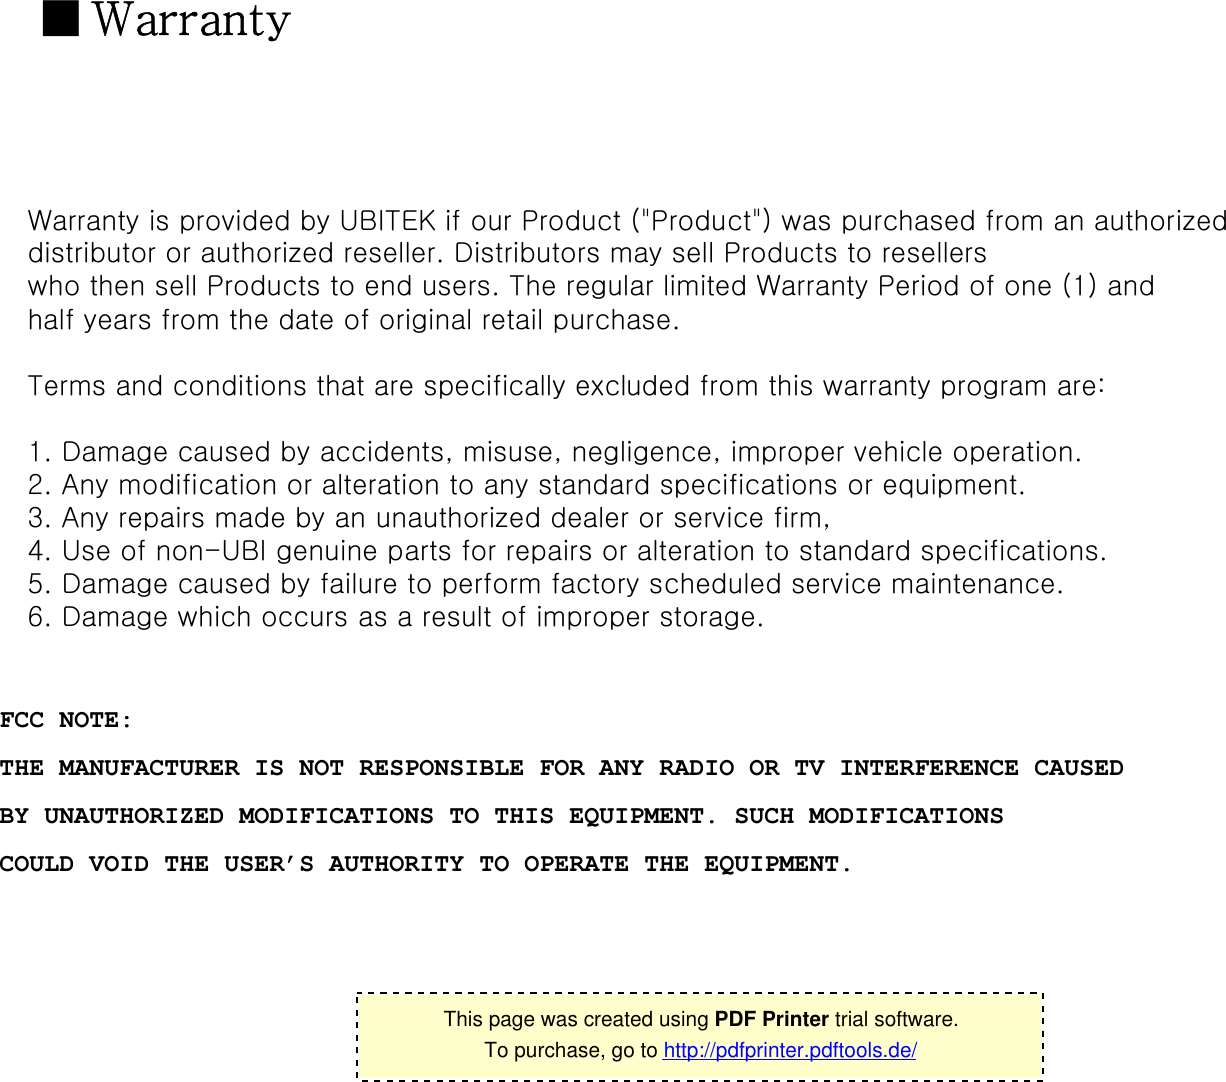 ■Warranty Warranty is provided by UBITEK if our Product (&quot;Product&quot;) was purchased from an authorized distributor or authorized reseller. Distributors may sell Products to resellers who then sell Products to end users. The regular limited Warranty Period of one (1) and half years from the date of original retail purchase.Terms and conditions that are specifically excluded from this warranty program are:1. Damage caused by accidents, misuse, negligence, improper vehicle operation. 2. Any modification or alteration to any standard specifications or equipment. 3. Any repairs made by an unauthorized dealer or service firm, 4. Use of non-UBI genuine parts for repairs or alteration to standard specifications. 5. Damage caused by failure to perform factory scheduled service maintenance. 6. Damage which occurs as a result of improper storage. 16This page was created using PDF Printer trial software.To purchase, go to http://pdfprinter.pdftools.de/FCC NOTE:THE MANUFACTURER IS NOT RESPONSIBLE FOR ANY RADIO OR TV INTERFERENCE CAUSED   BY UNAUTHORIZED MODIFICATIONS TO THIS EQUIPMENT. SUCH MODIFICATIONSCOULD VOID THE USER’S AUTHORITY TO OPERATE THE EQUIPMENT.